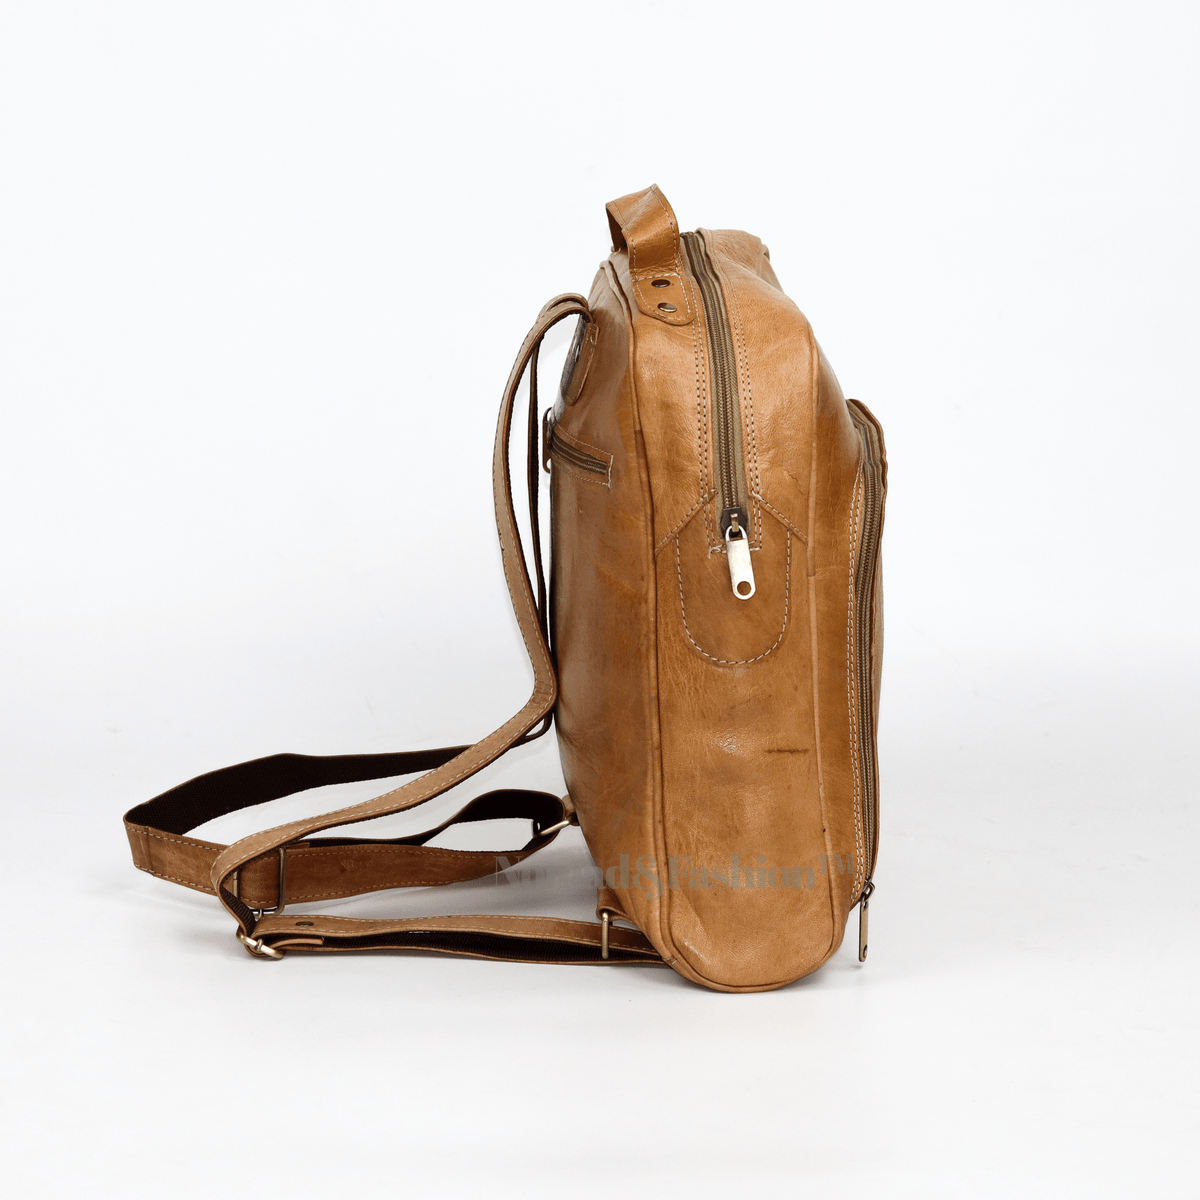 Nomad Trailblazer Leather Backpack for Hiking and outdoor